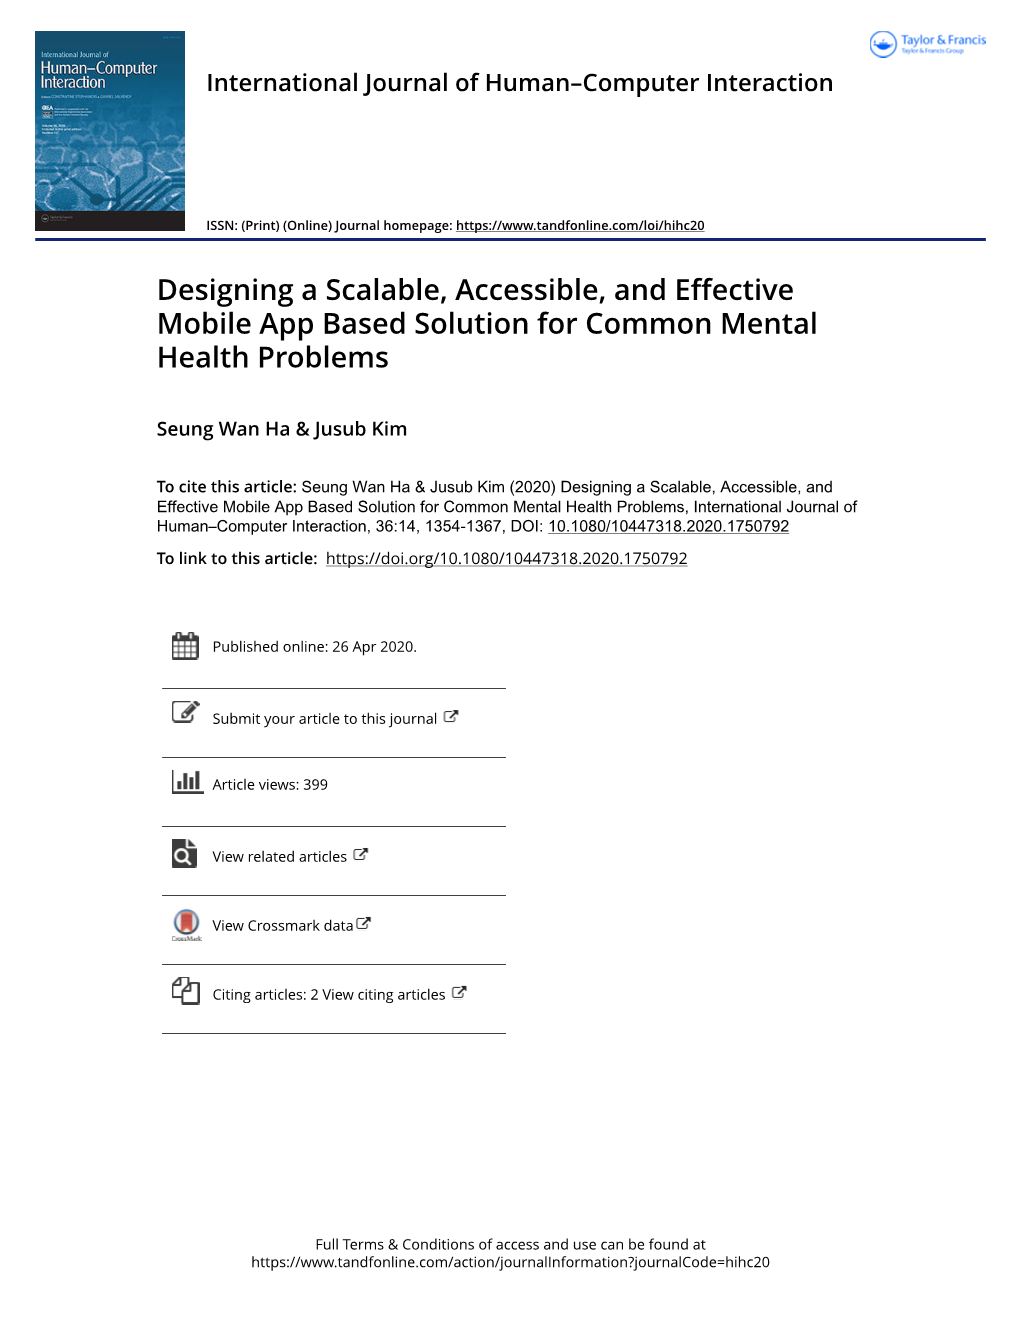 Designing a Scalable, Accessible, and Effective Mobile App Based Solution for Common Mental Health Problems